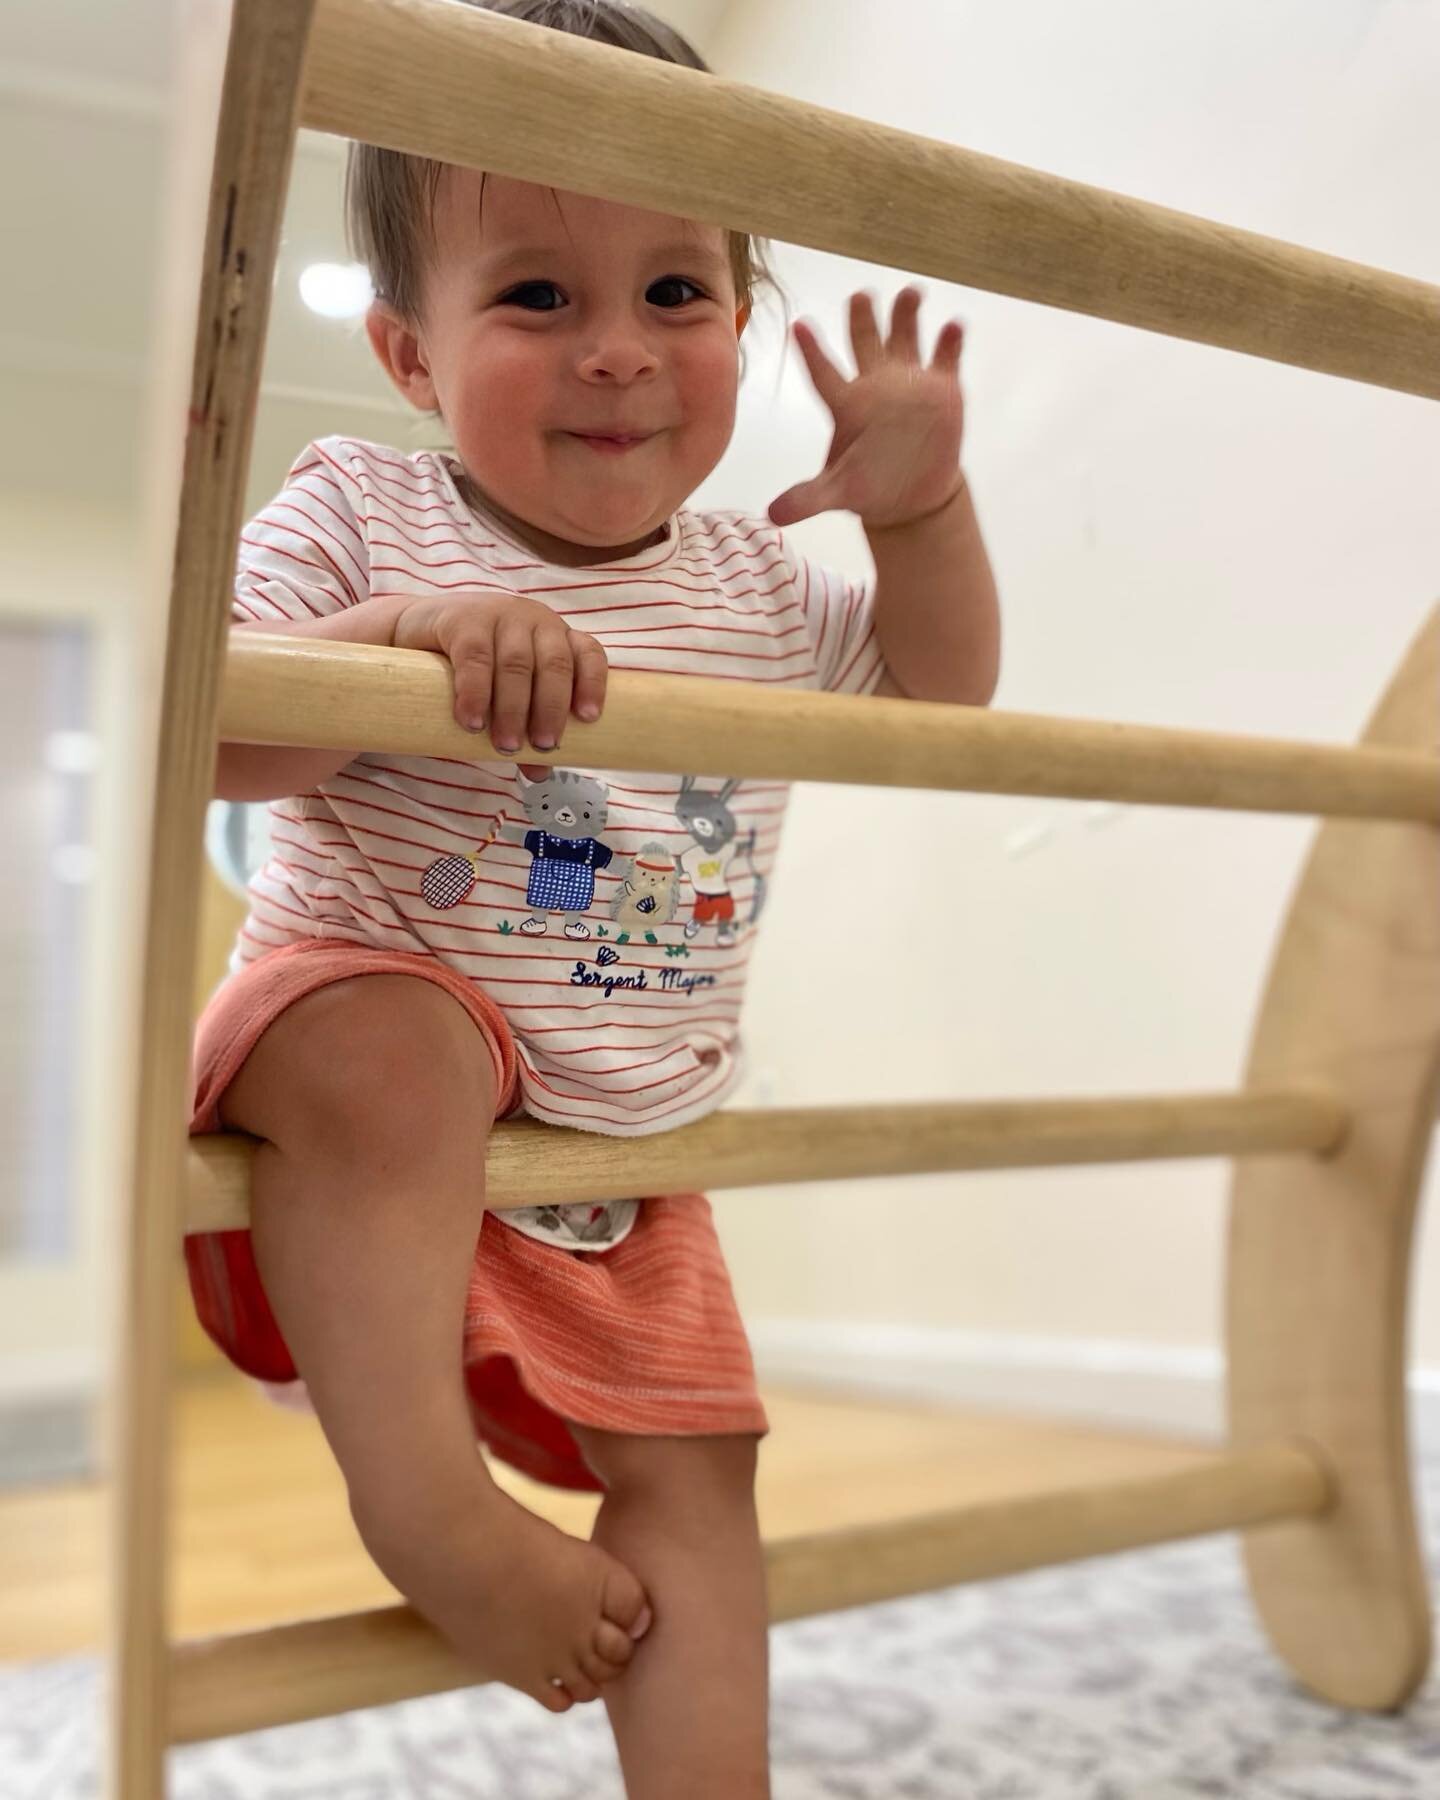 Our youngest campers are having fun exploring their limits in the classroom this summer! Infants benefit from experimenting with climbing (and sometimes tumbling!) on their own to help them learn the value of trying things over and over until they su